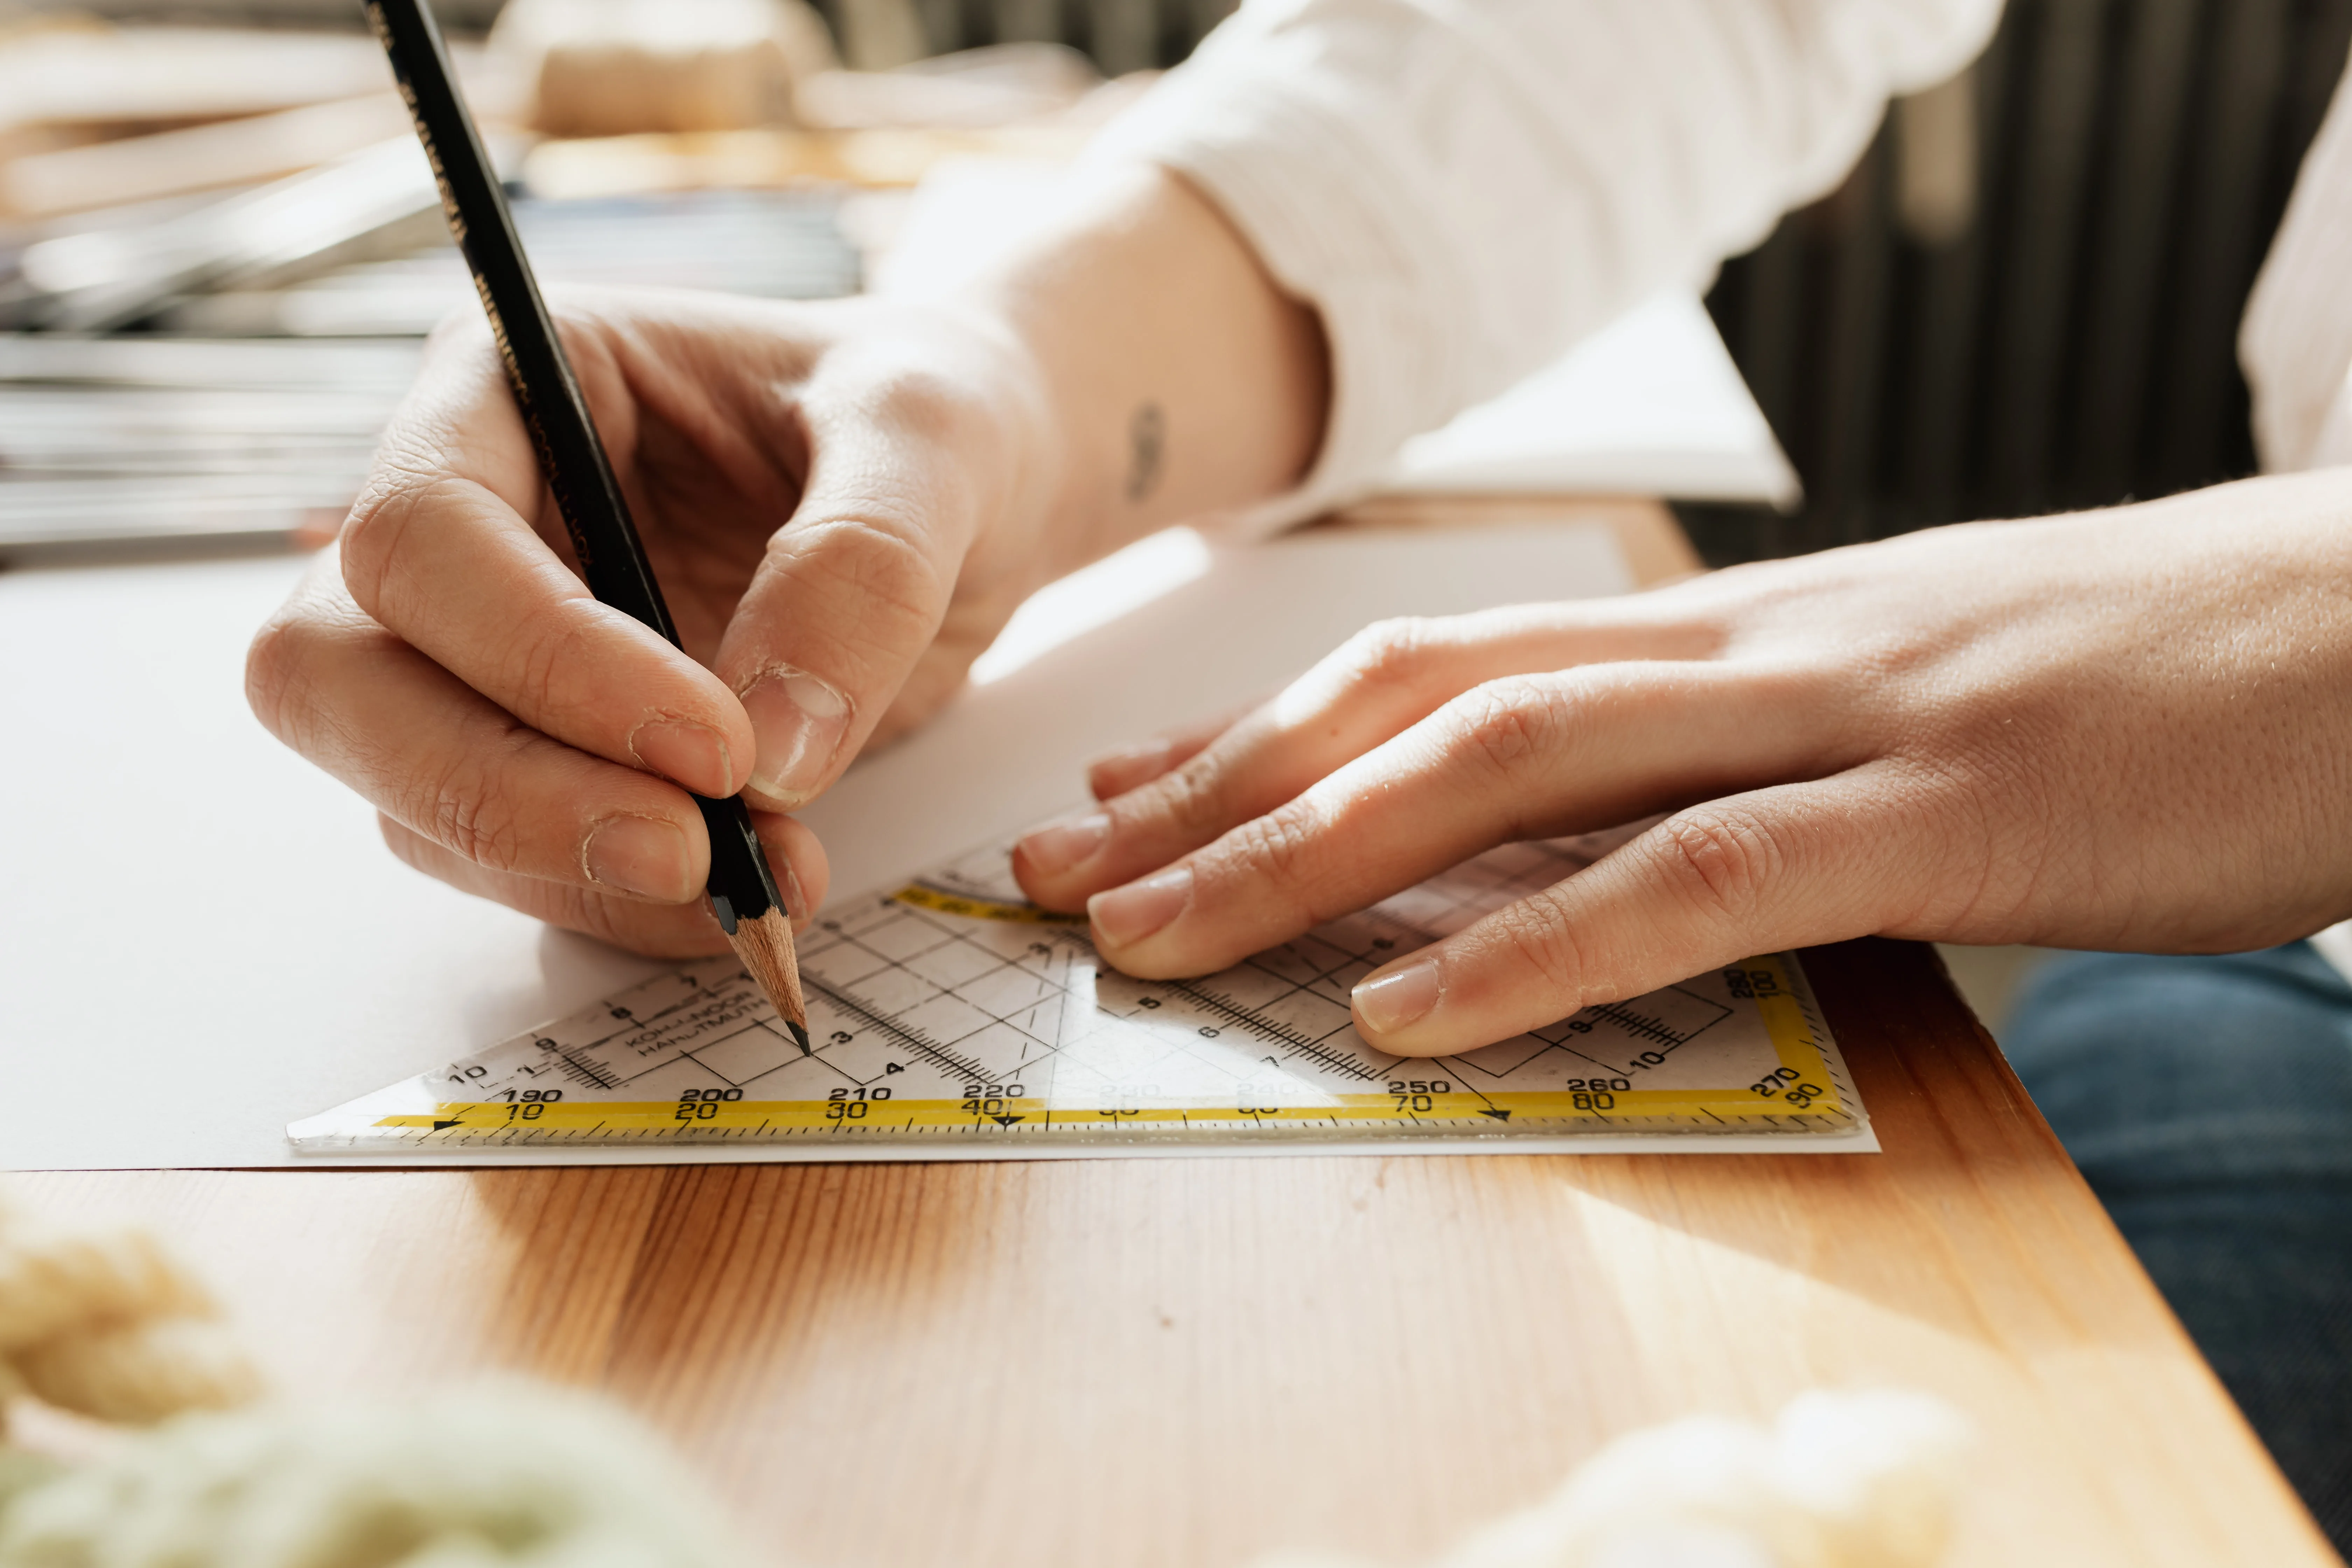 Hire An Architect: 4 Things to Keep In Mind